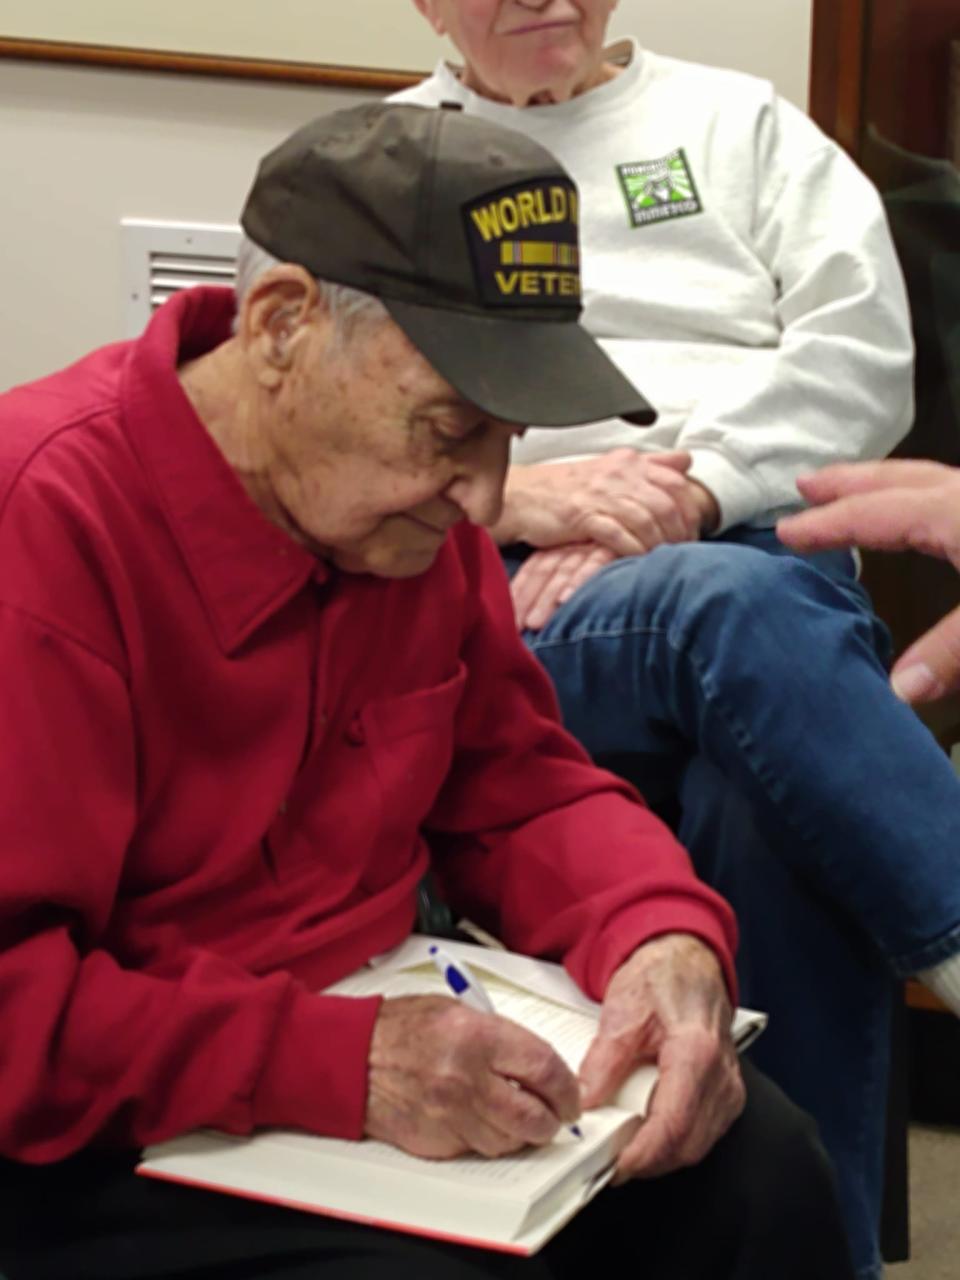 Local veteran Guy Prestia signed the copy of the book, as he was mentioned in it, and even wrote his military serial number into it as well.